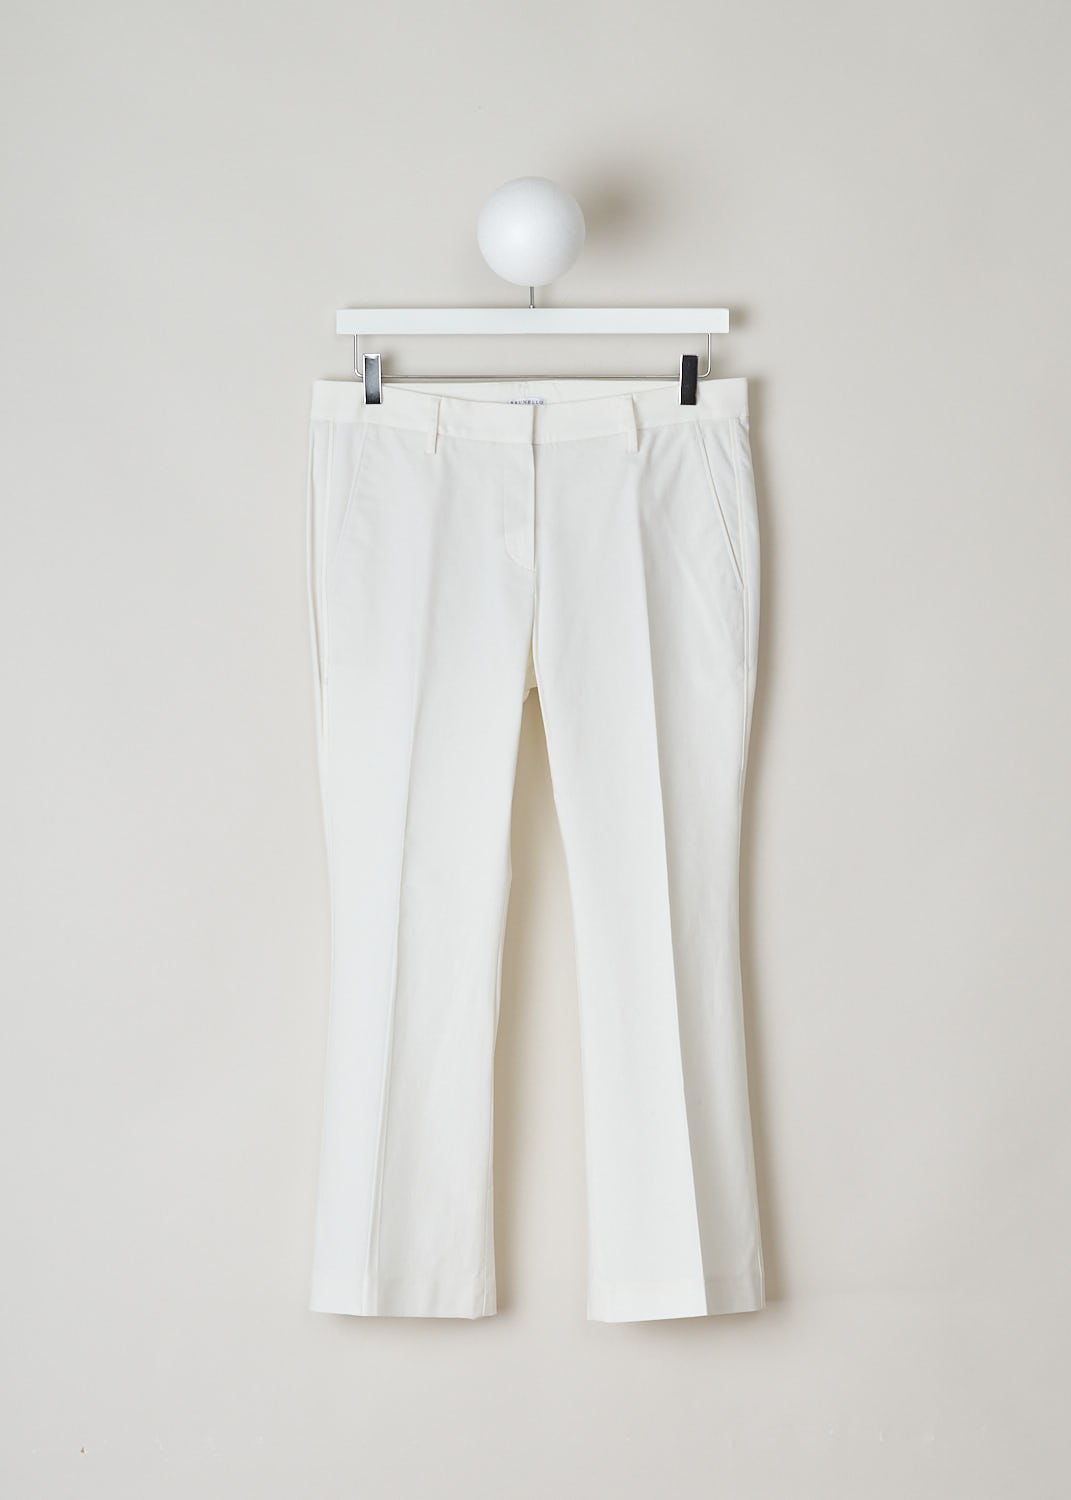 Brunello Cucinelli, Off-white boot-cut chino, M0F70P1951_7025, white, front, Made in the flat front model, with boot-cut legs. Furthermore, this model has two forward slanted pockets on the front and two jetted pockets on the back.